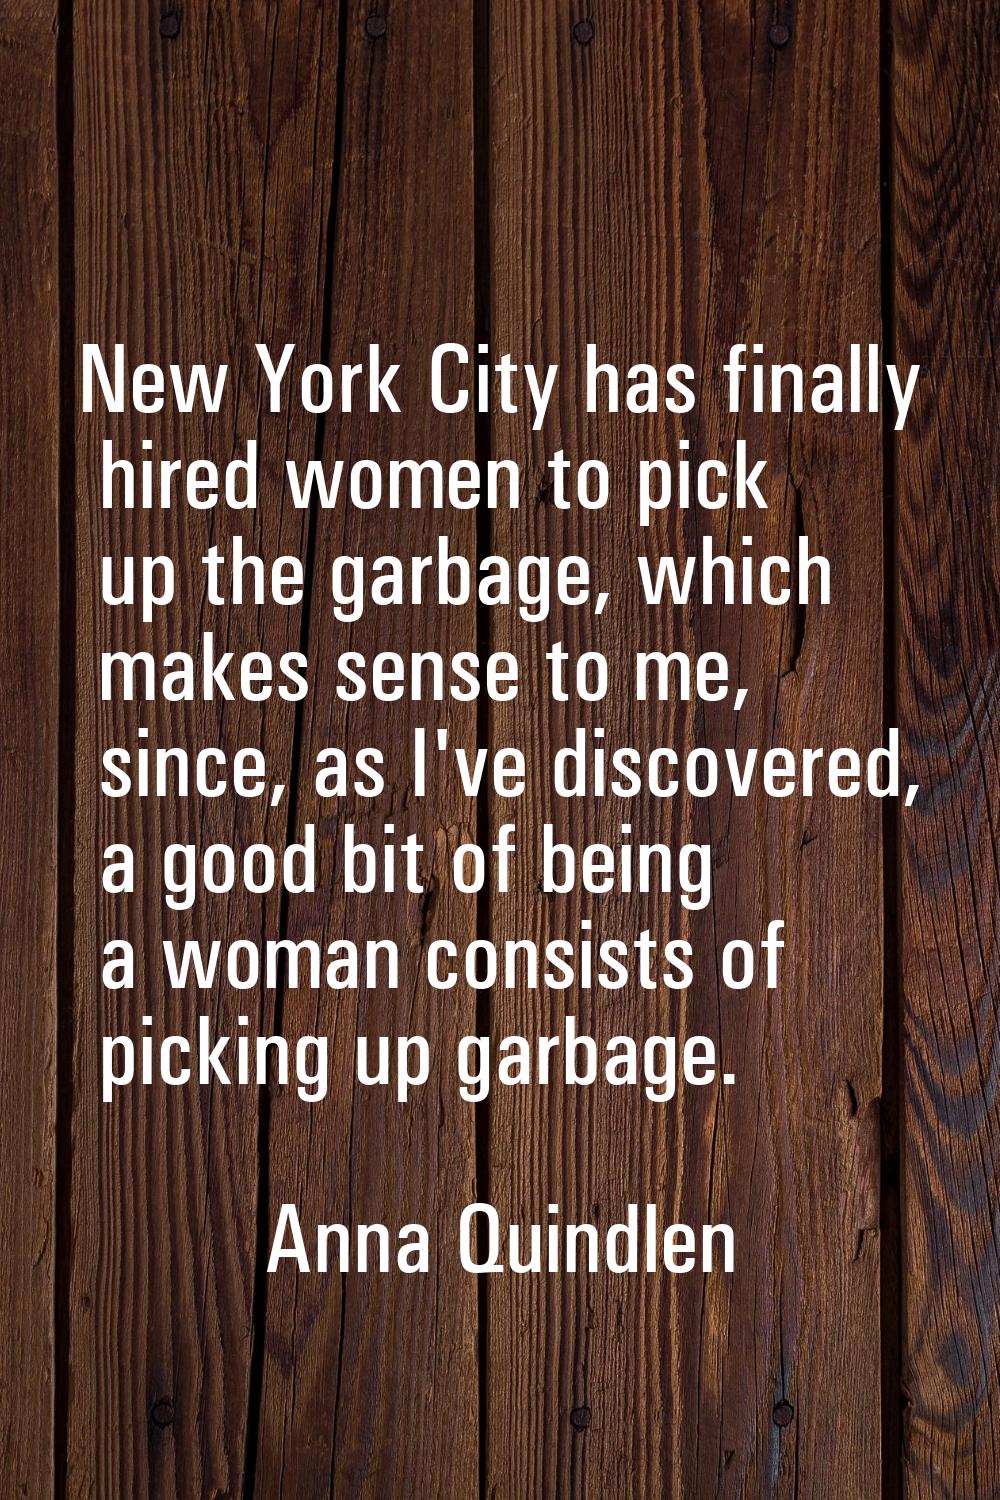 New York City has finally hired women to pick up the garbage, which makes sense to me, since, as I'